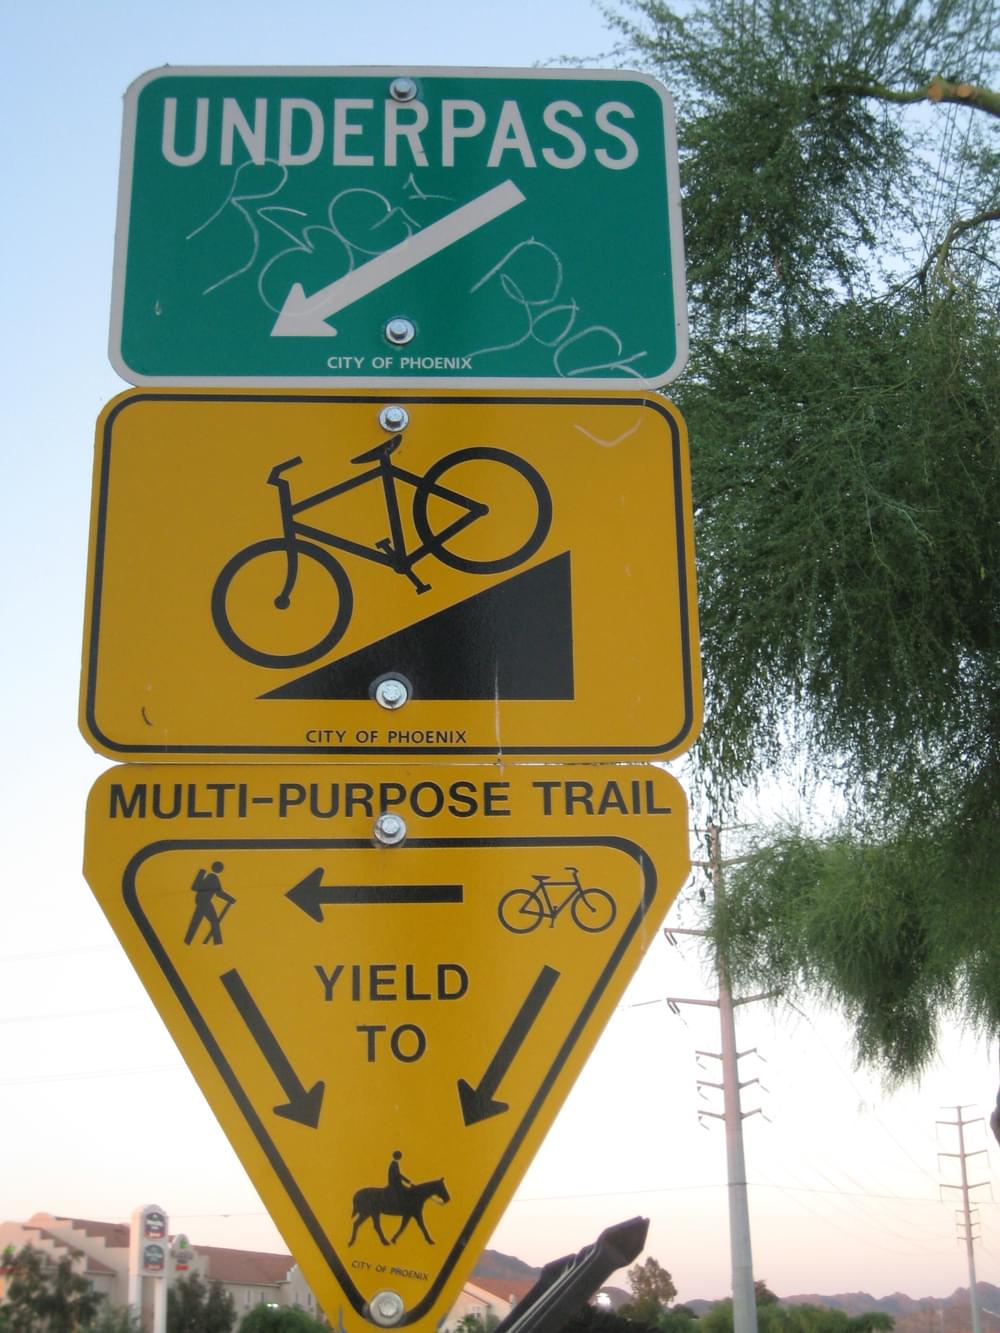 Patterned after the highway yield sign, the standard trail users yield sign; Phoenix, Arizona